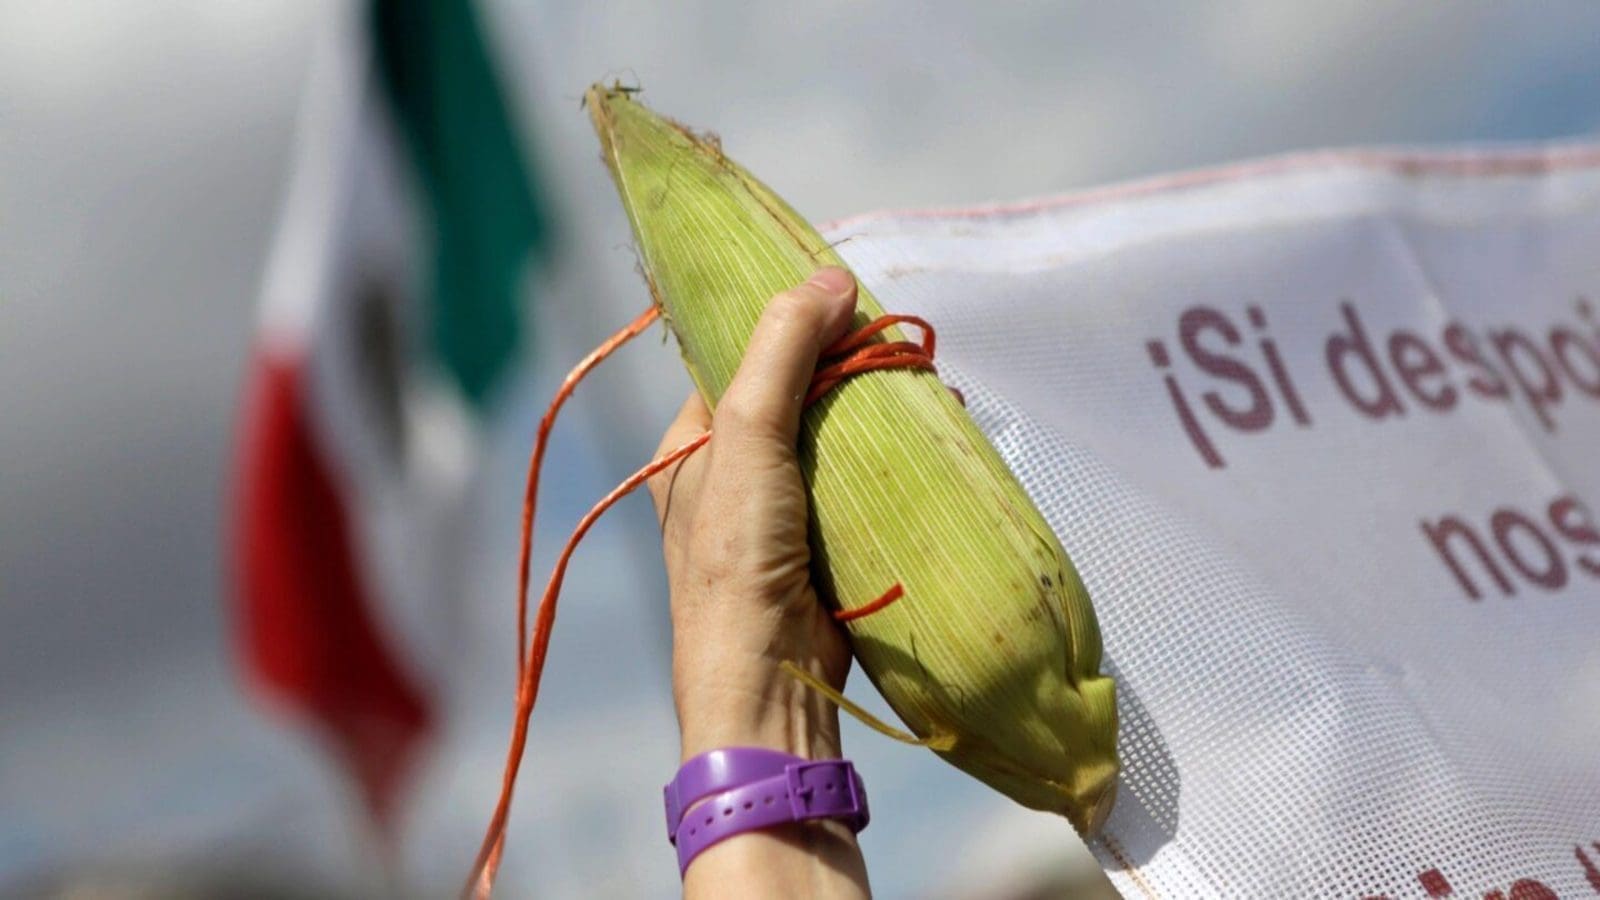 Mexico’s ban on GM corn could bear negative repercussions